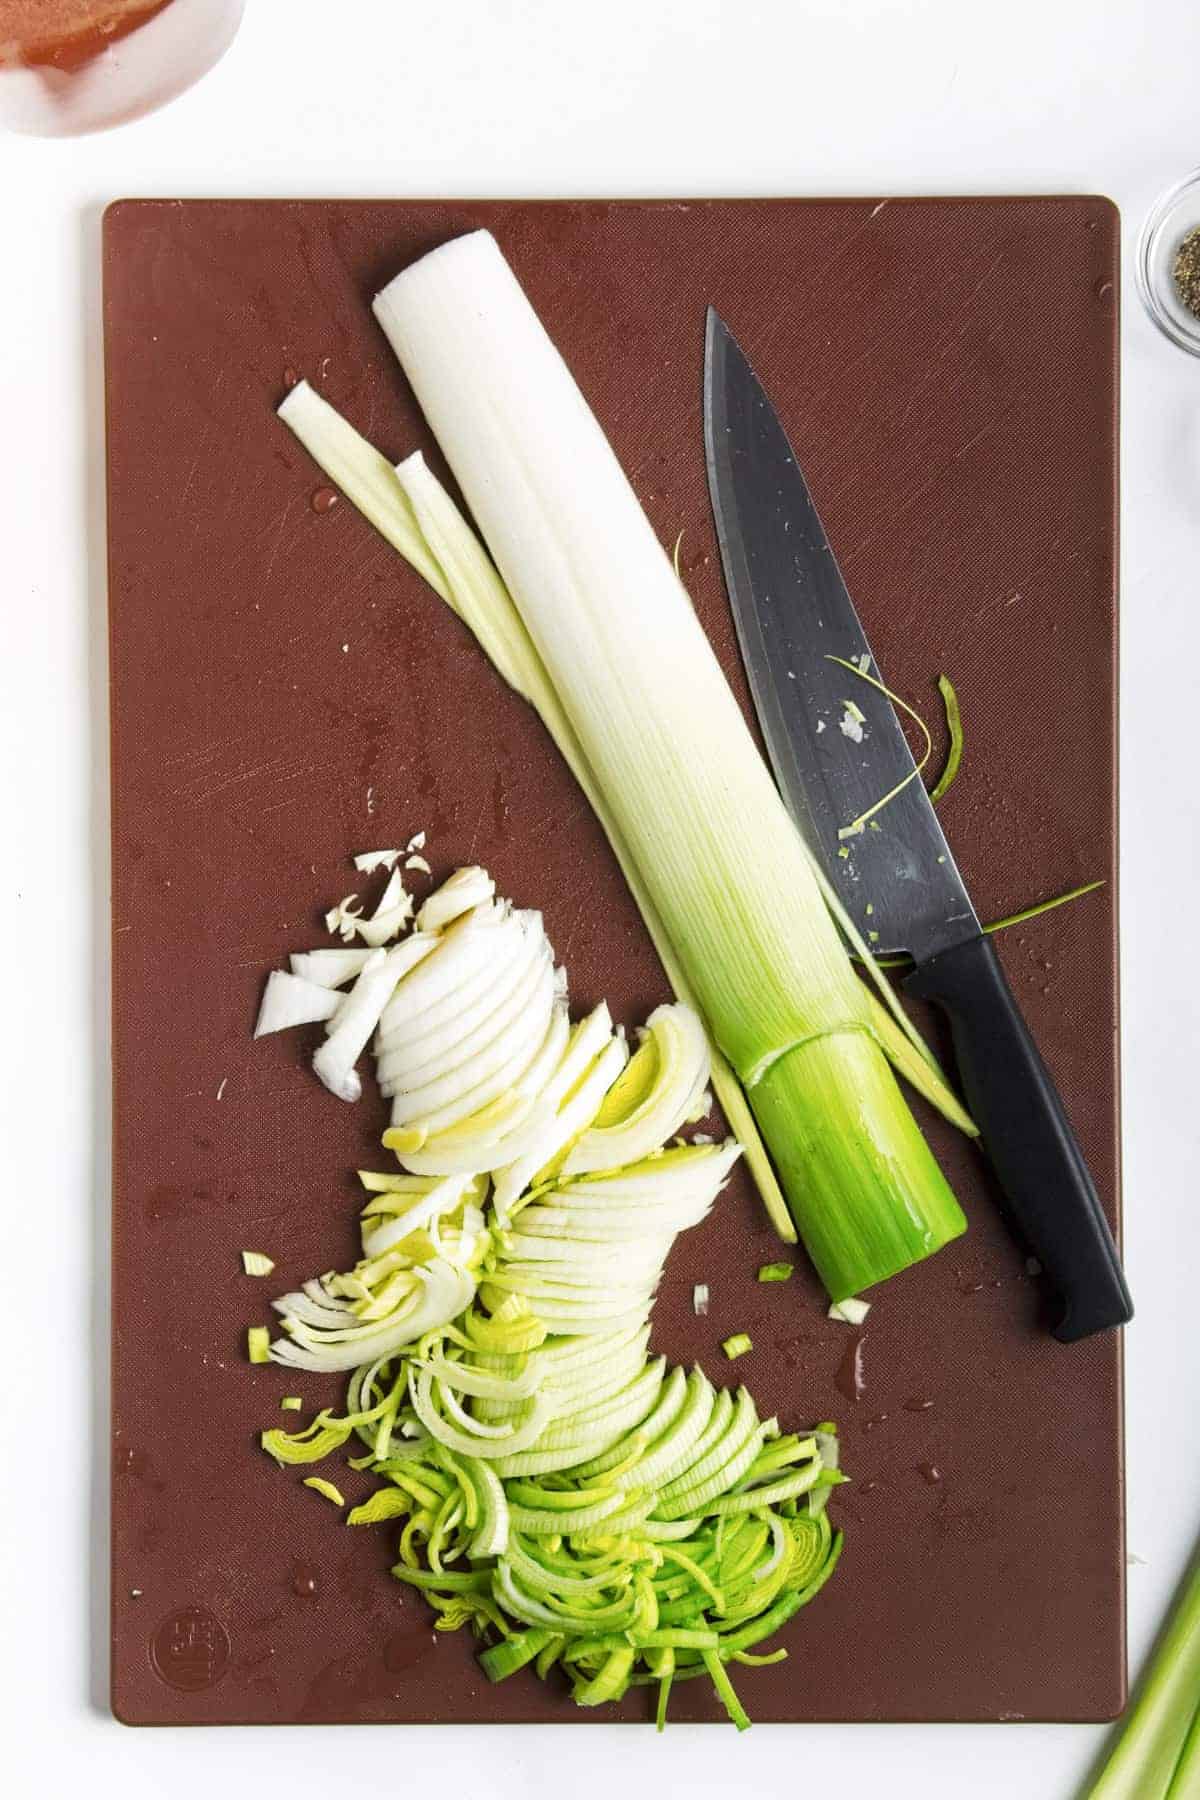 Fresh leek partially sliced on cutting board with black handle knife.